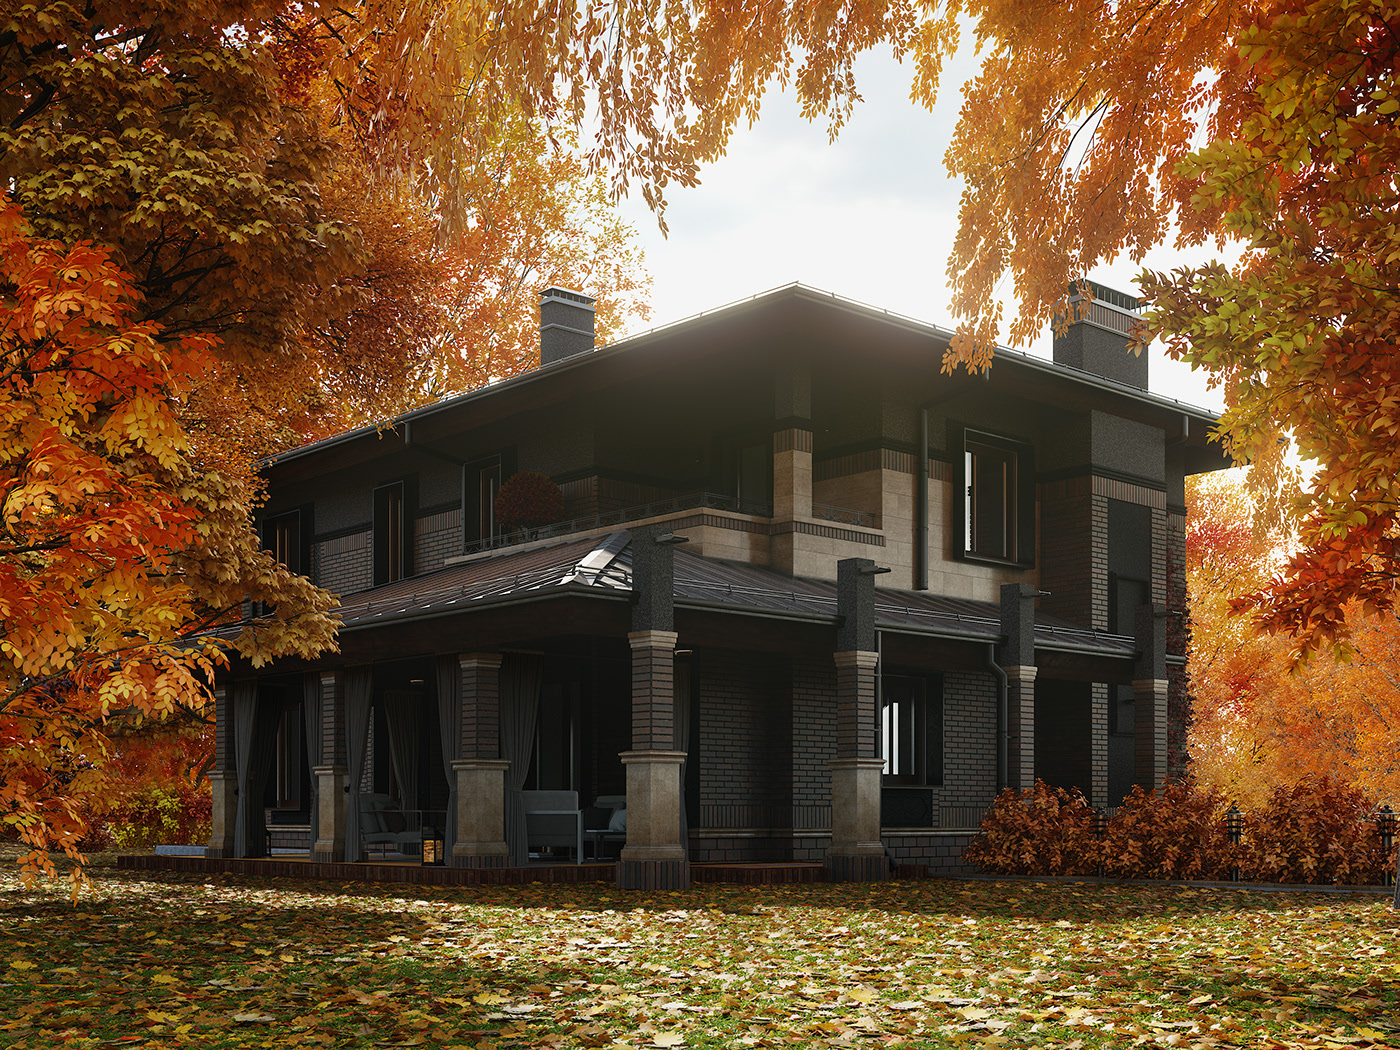 House/colors of autumn # 2 on Behance